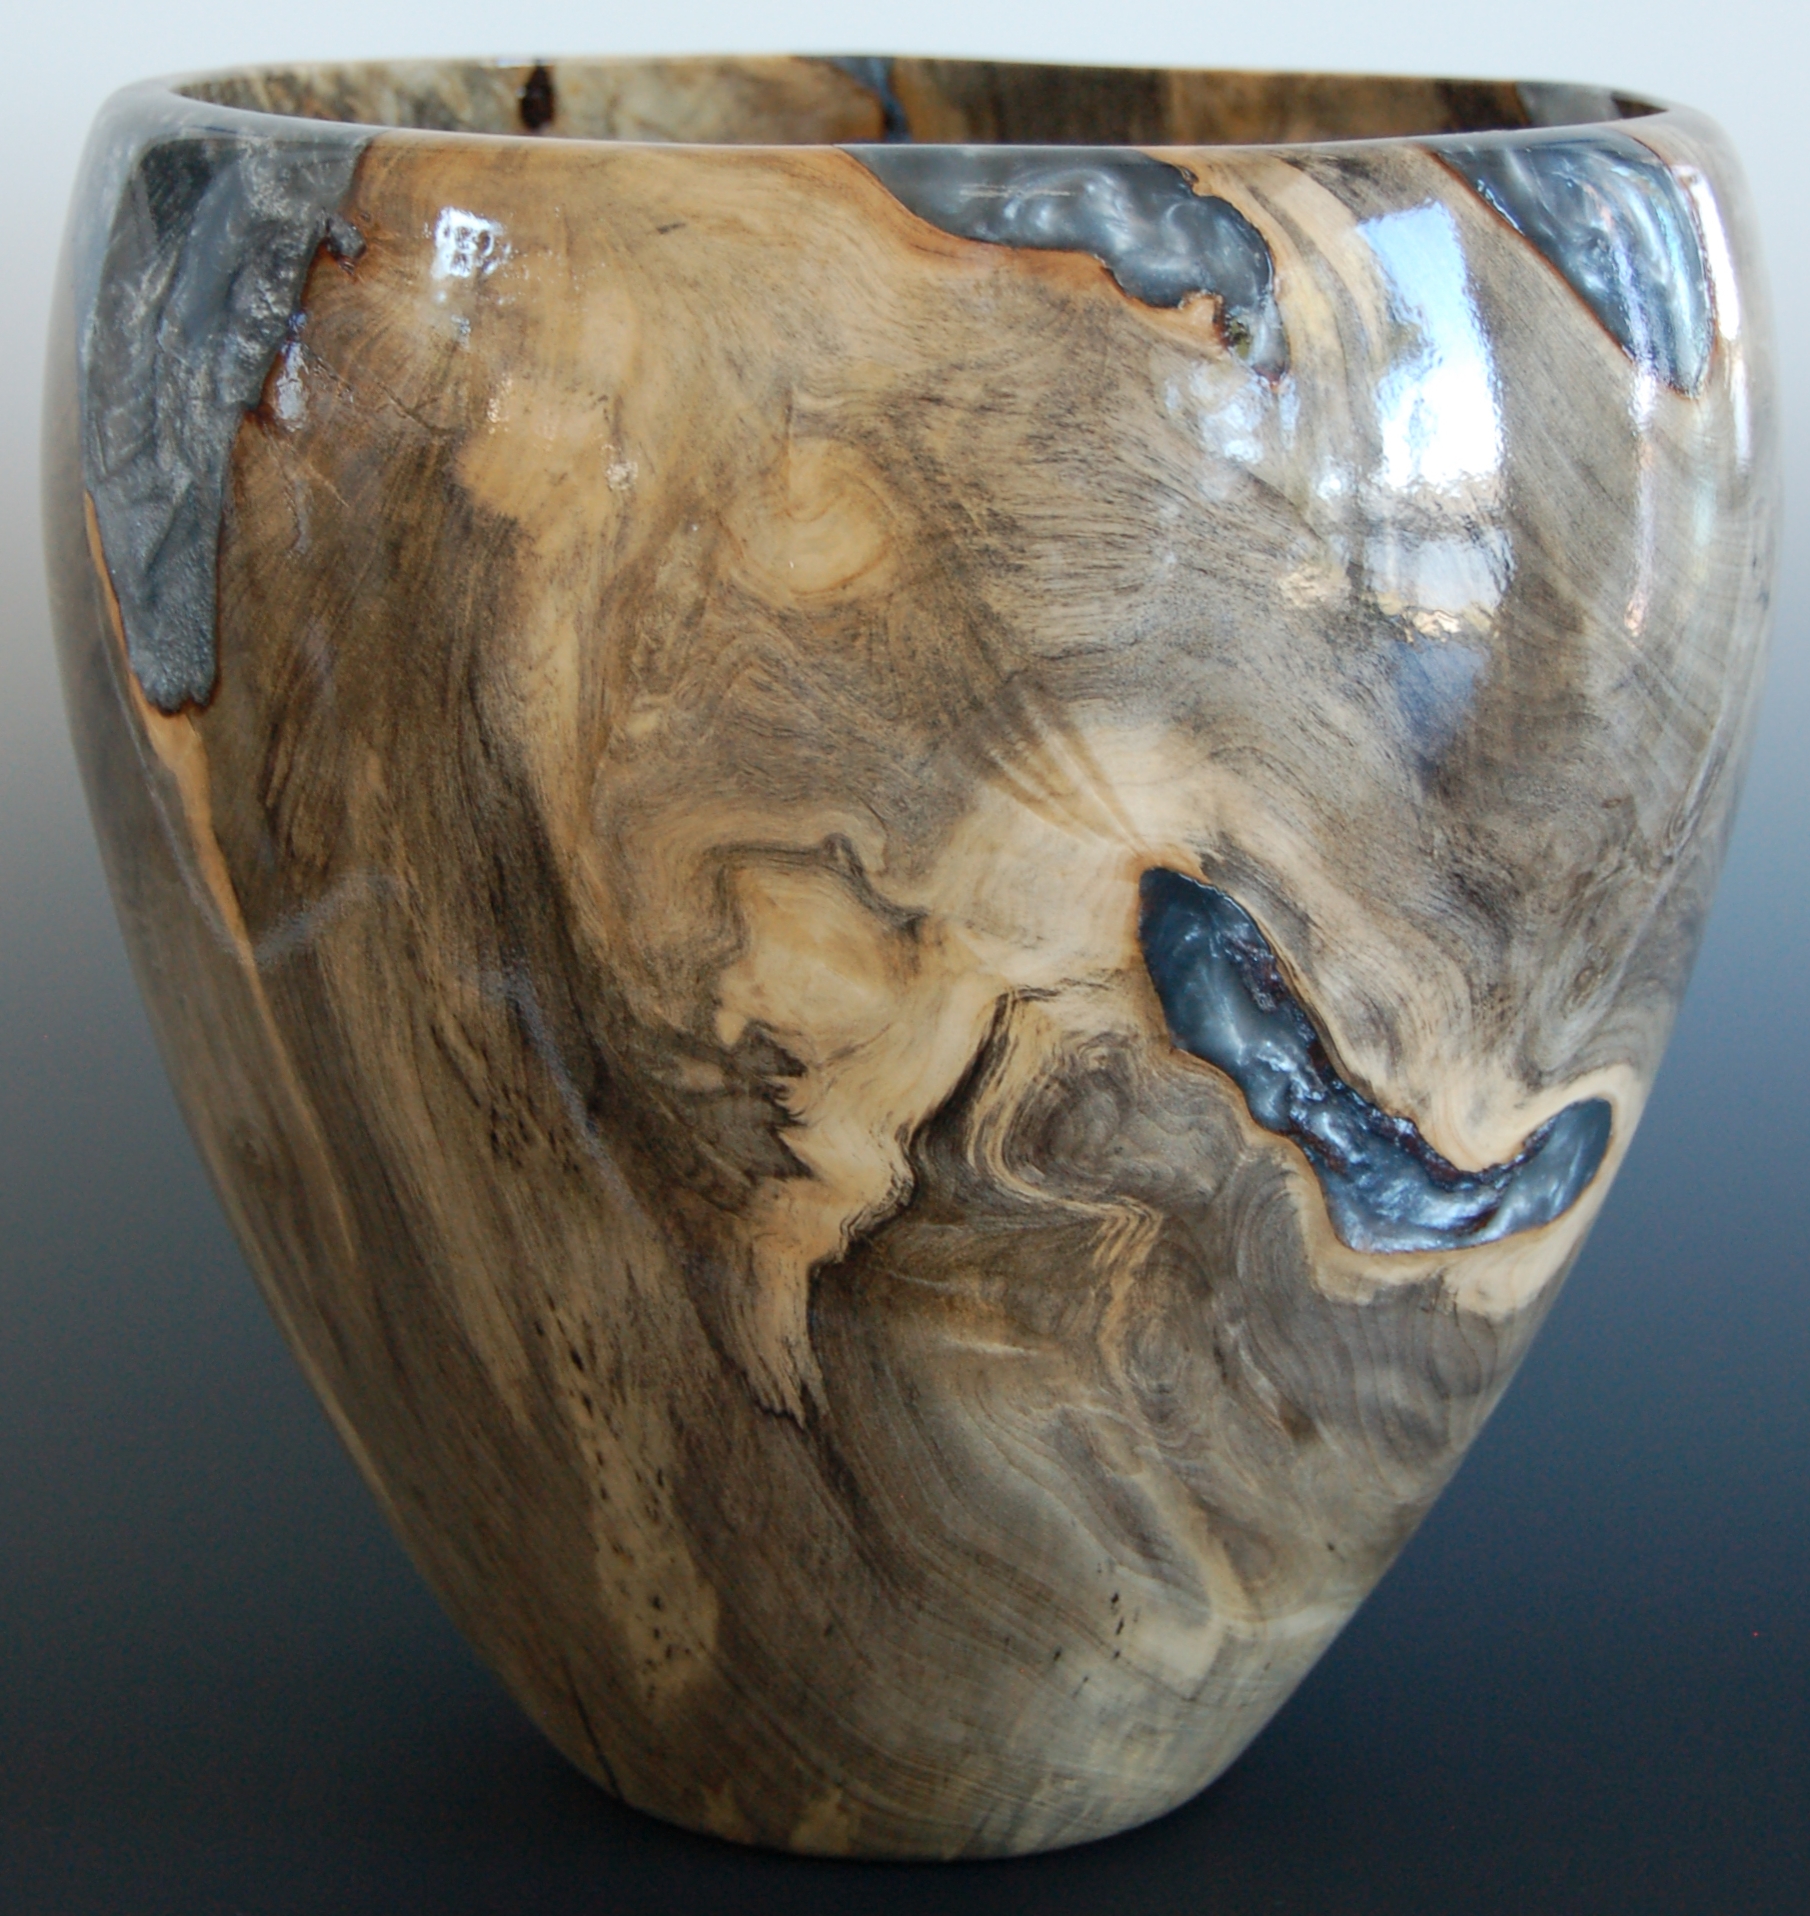 Buckeye Burl vase with pigmented resin filling in the voids